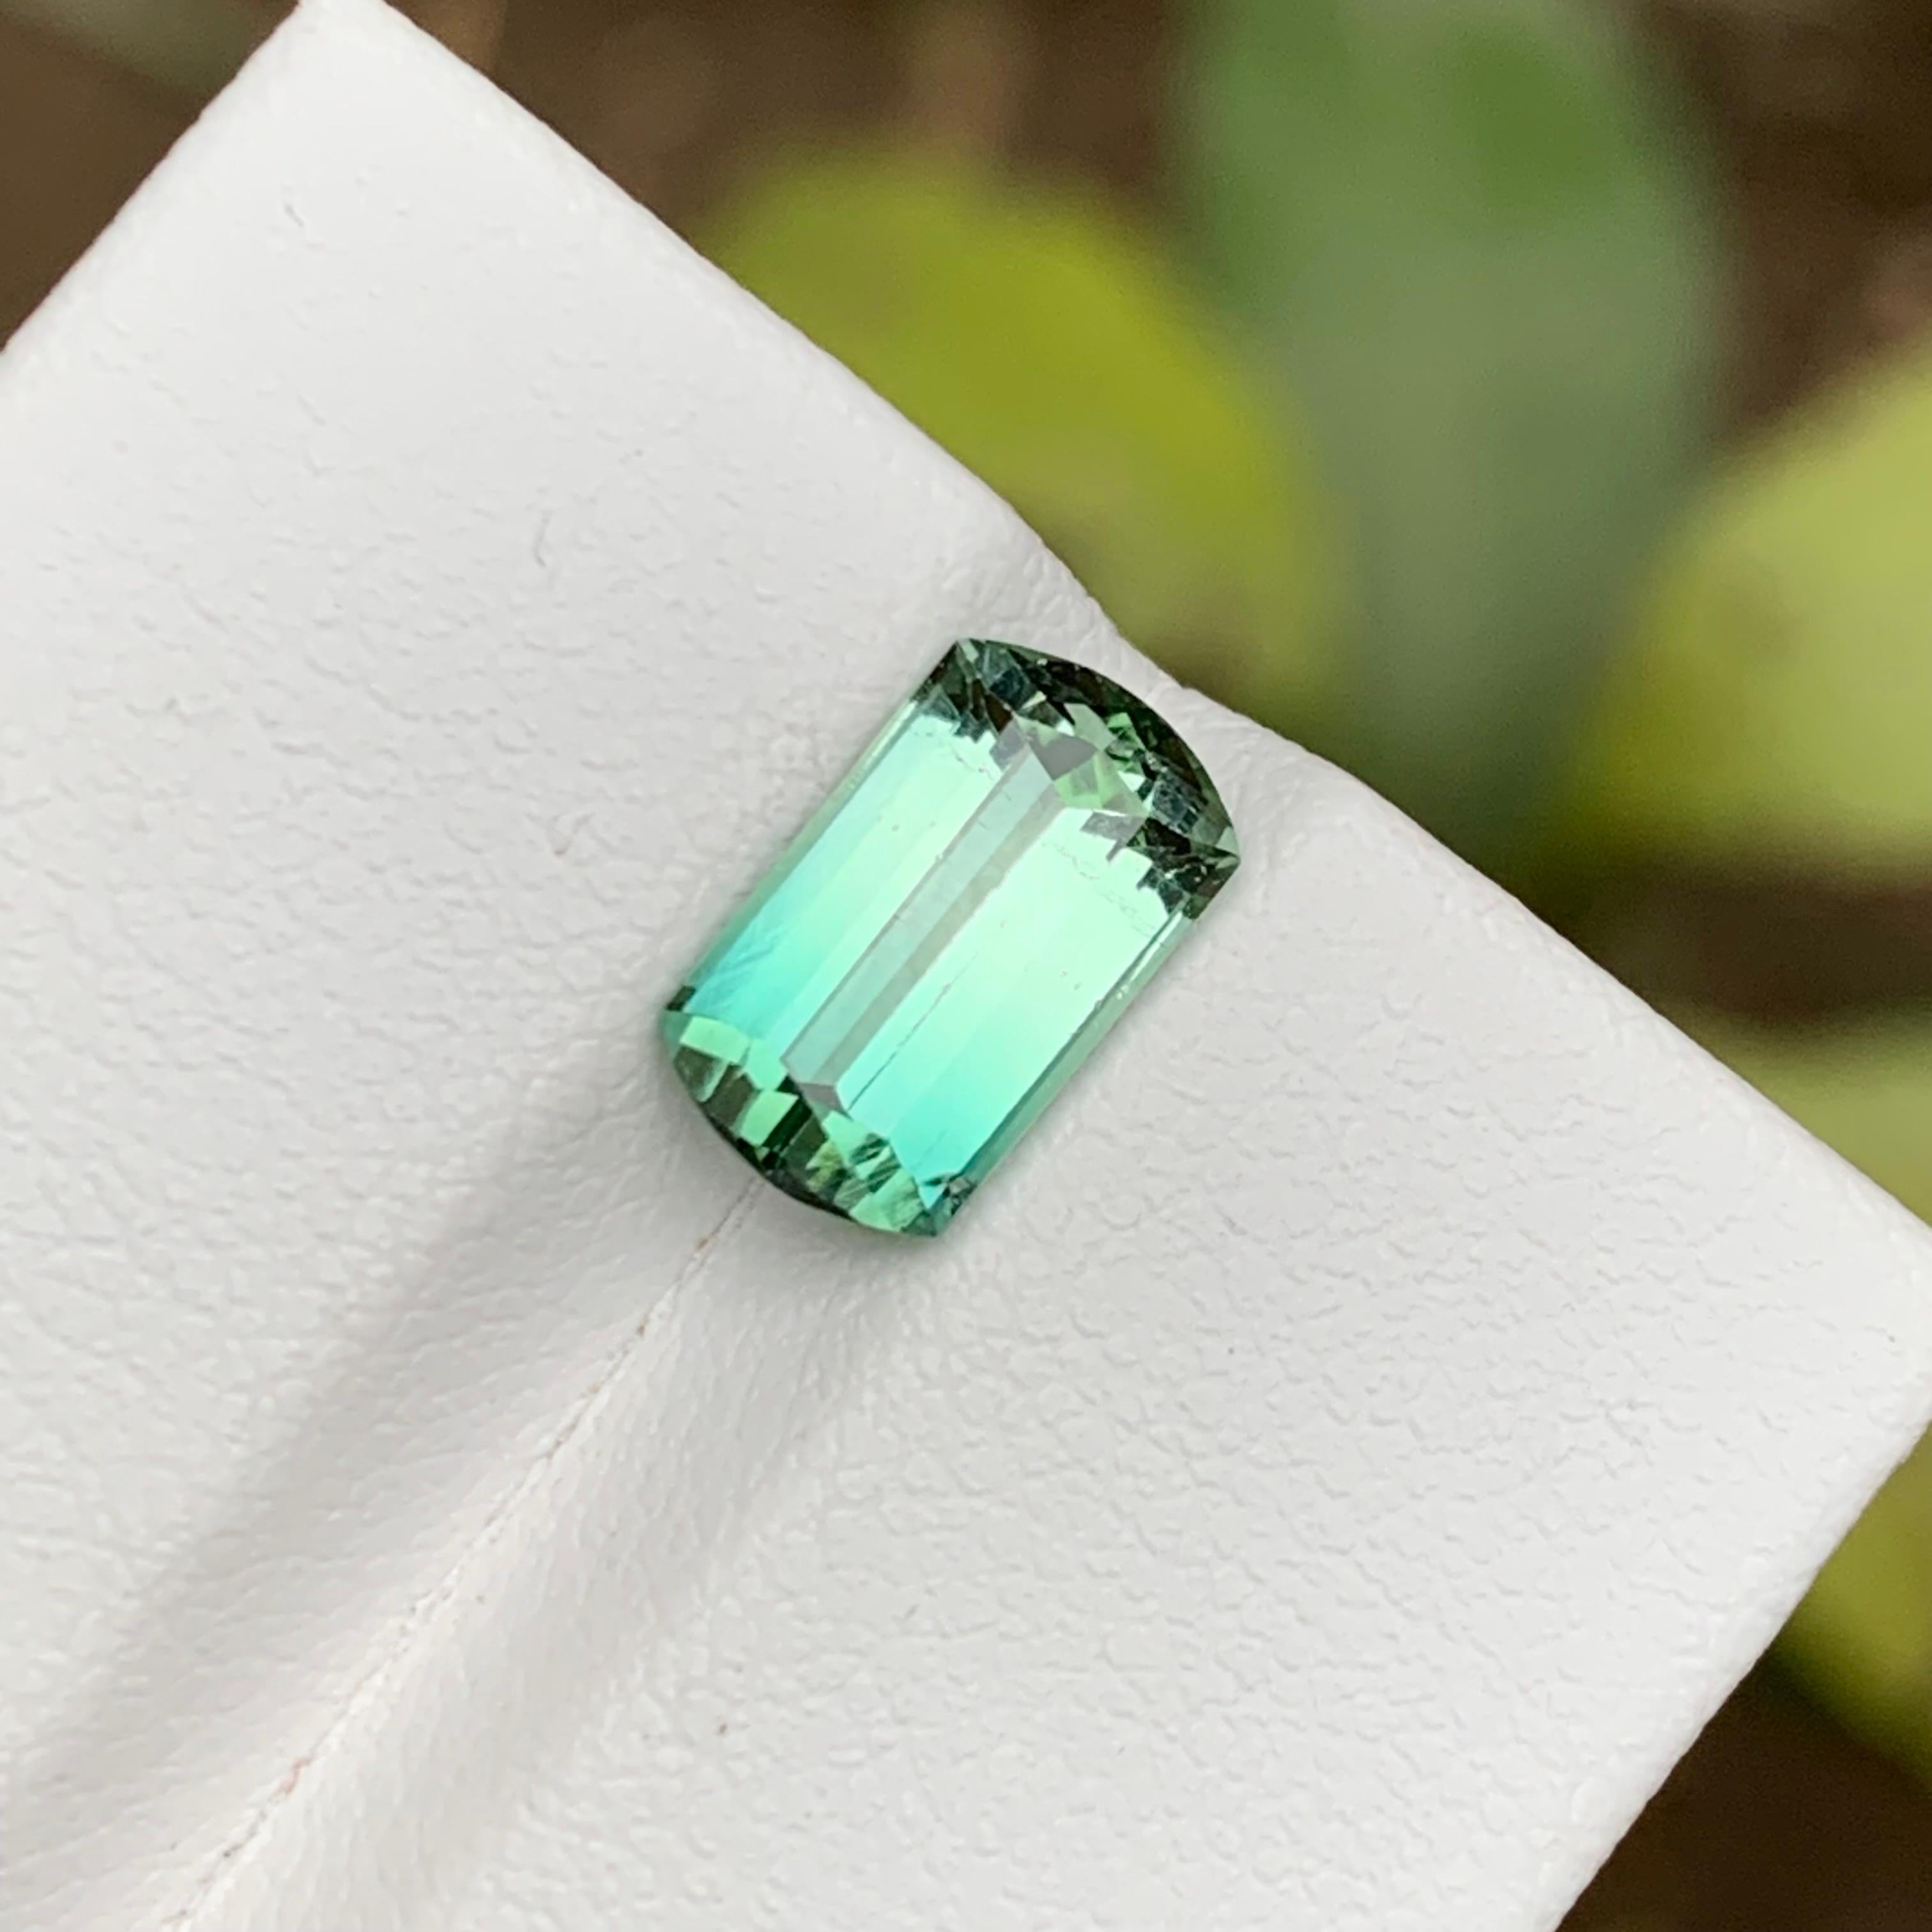 GEMSTONE TYPE: Tourmaline
PIECE(S): 1
WEIGHT: 2.50 Carat
SHAPE: Modified Step Emerald Cut
SIZE (MM):  10.16 x 6.01 x 4.87
COLOR: Bicolor
CLARITY: Approx 98% Eye Clean
TREATMENT: Not Treated
ORIGIN: Afghanistan
CERTIFICATE: On demand 

Captivating